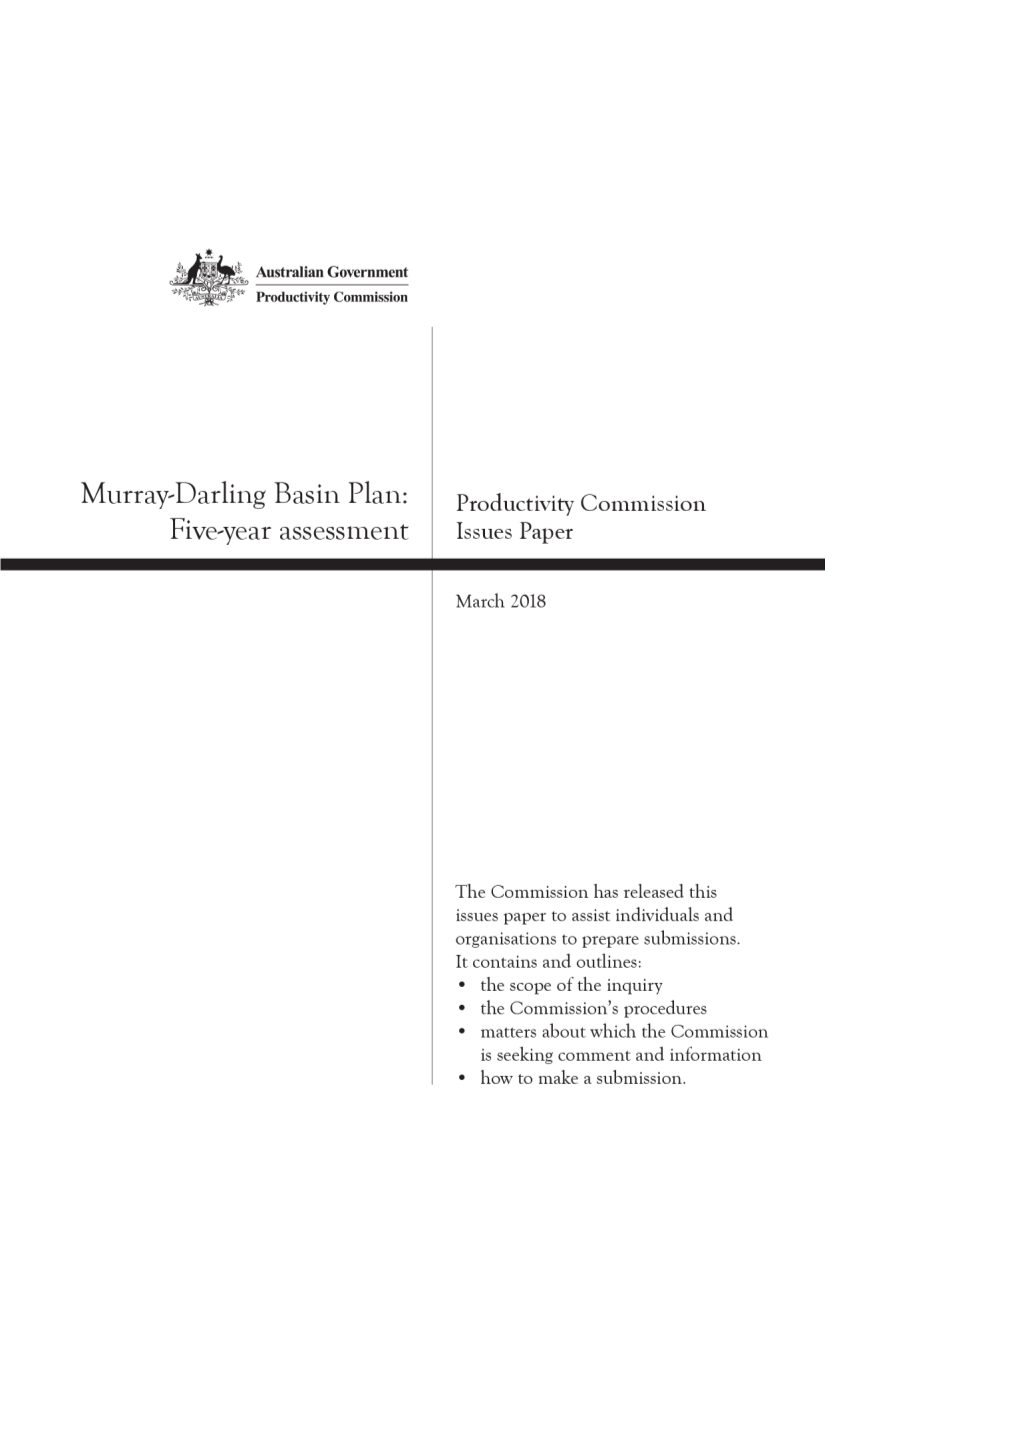 Murray-Darling Basin Plan: 5-Year Assessment - Issues Paper